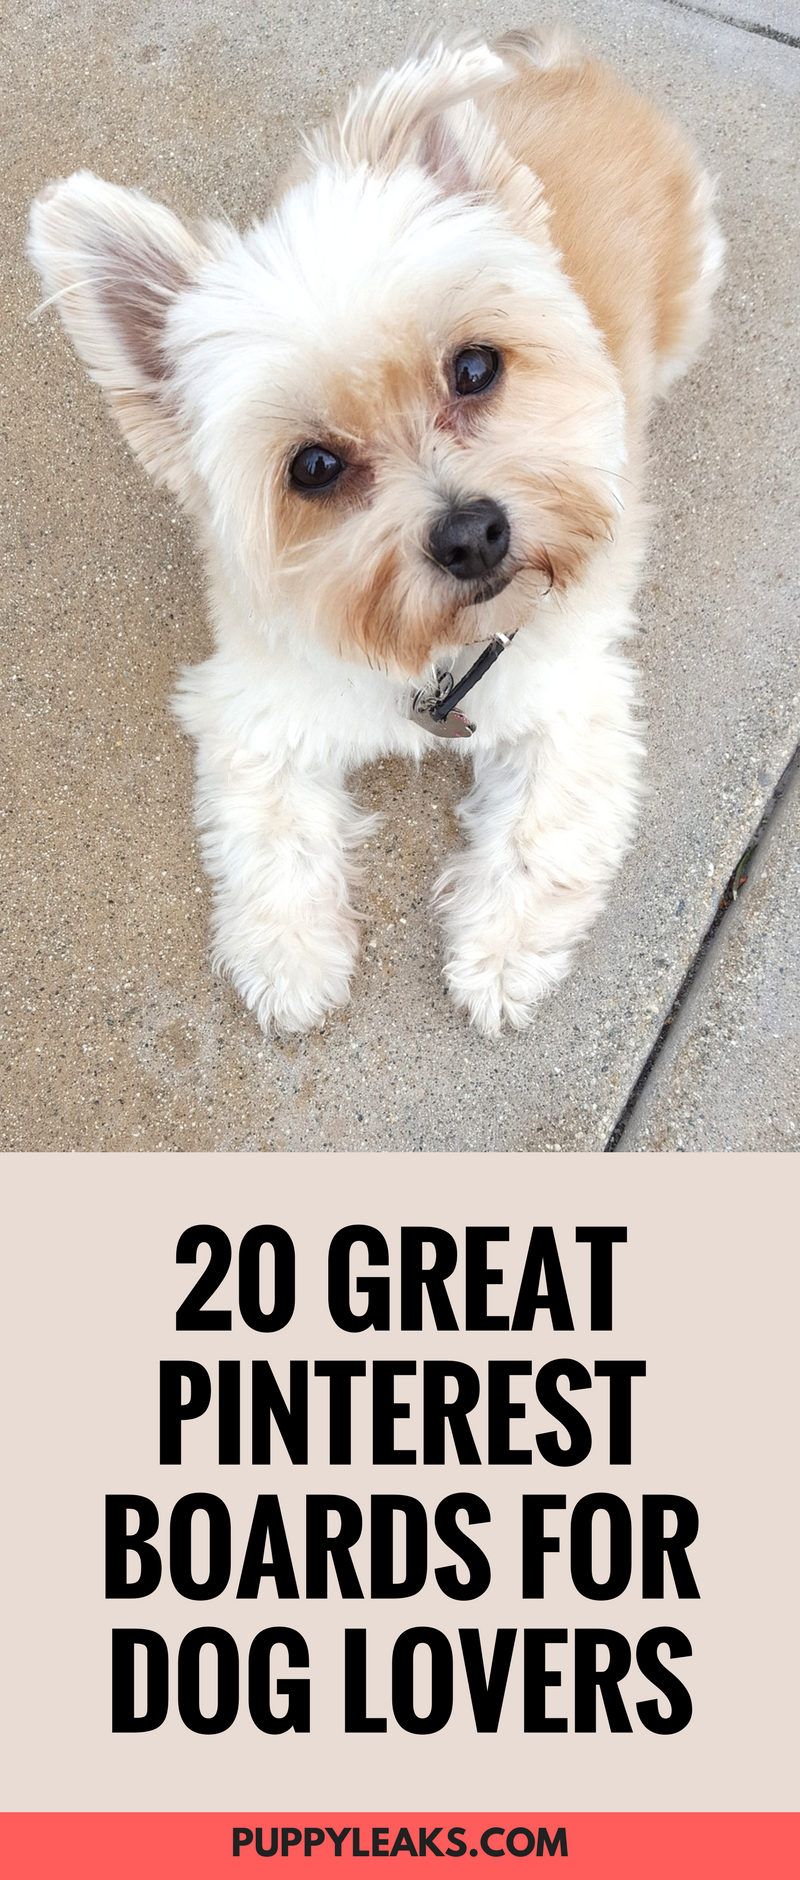 20 Great Pinterest Boards For Dog Lovers to Follow